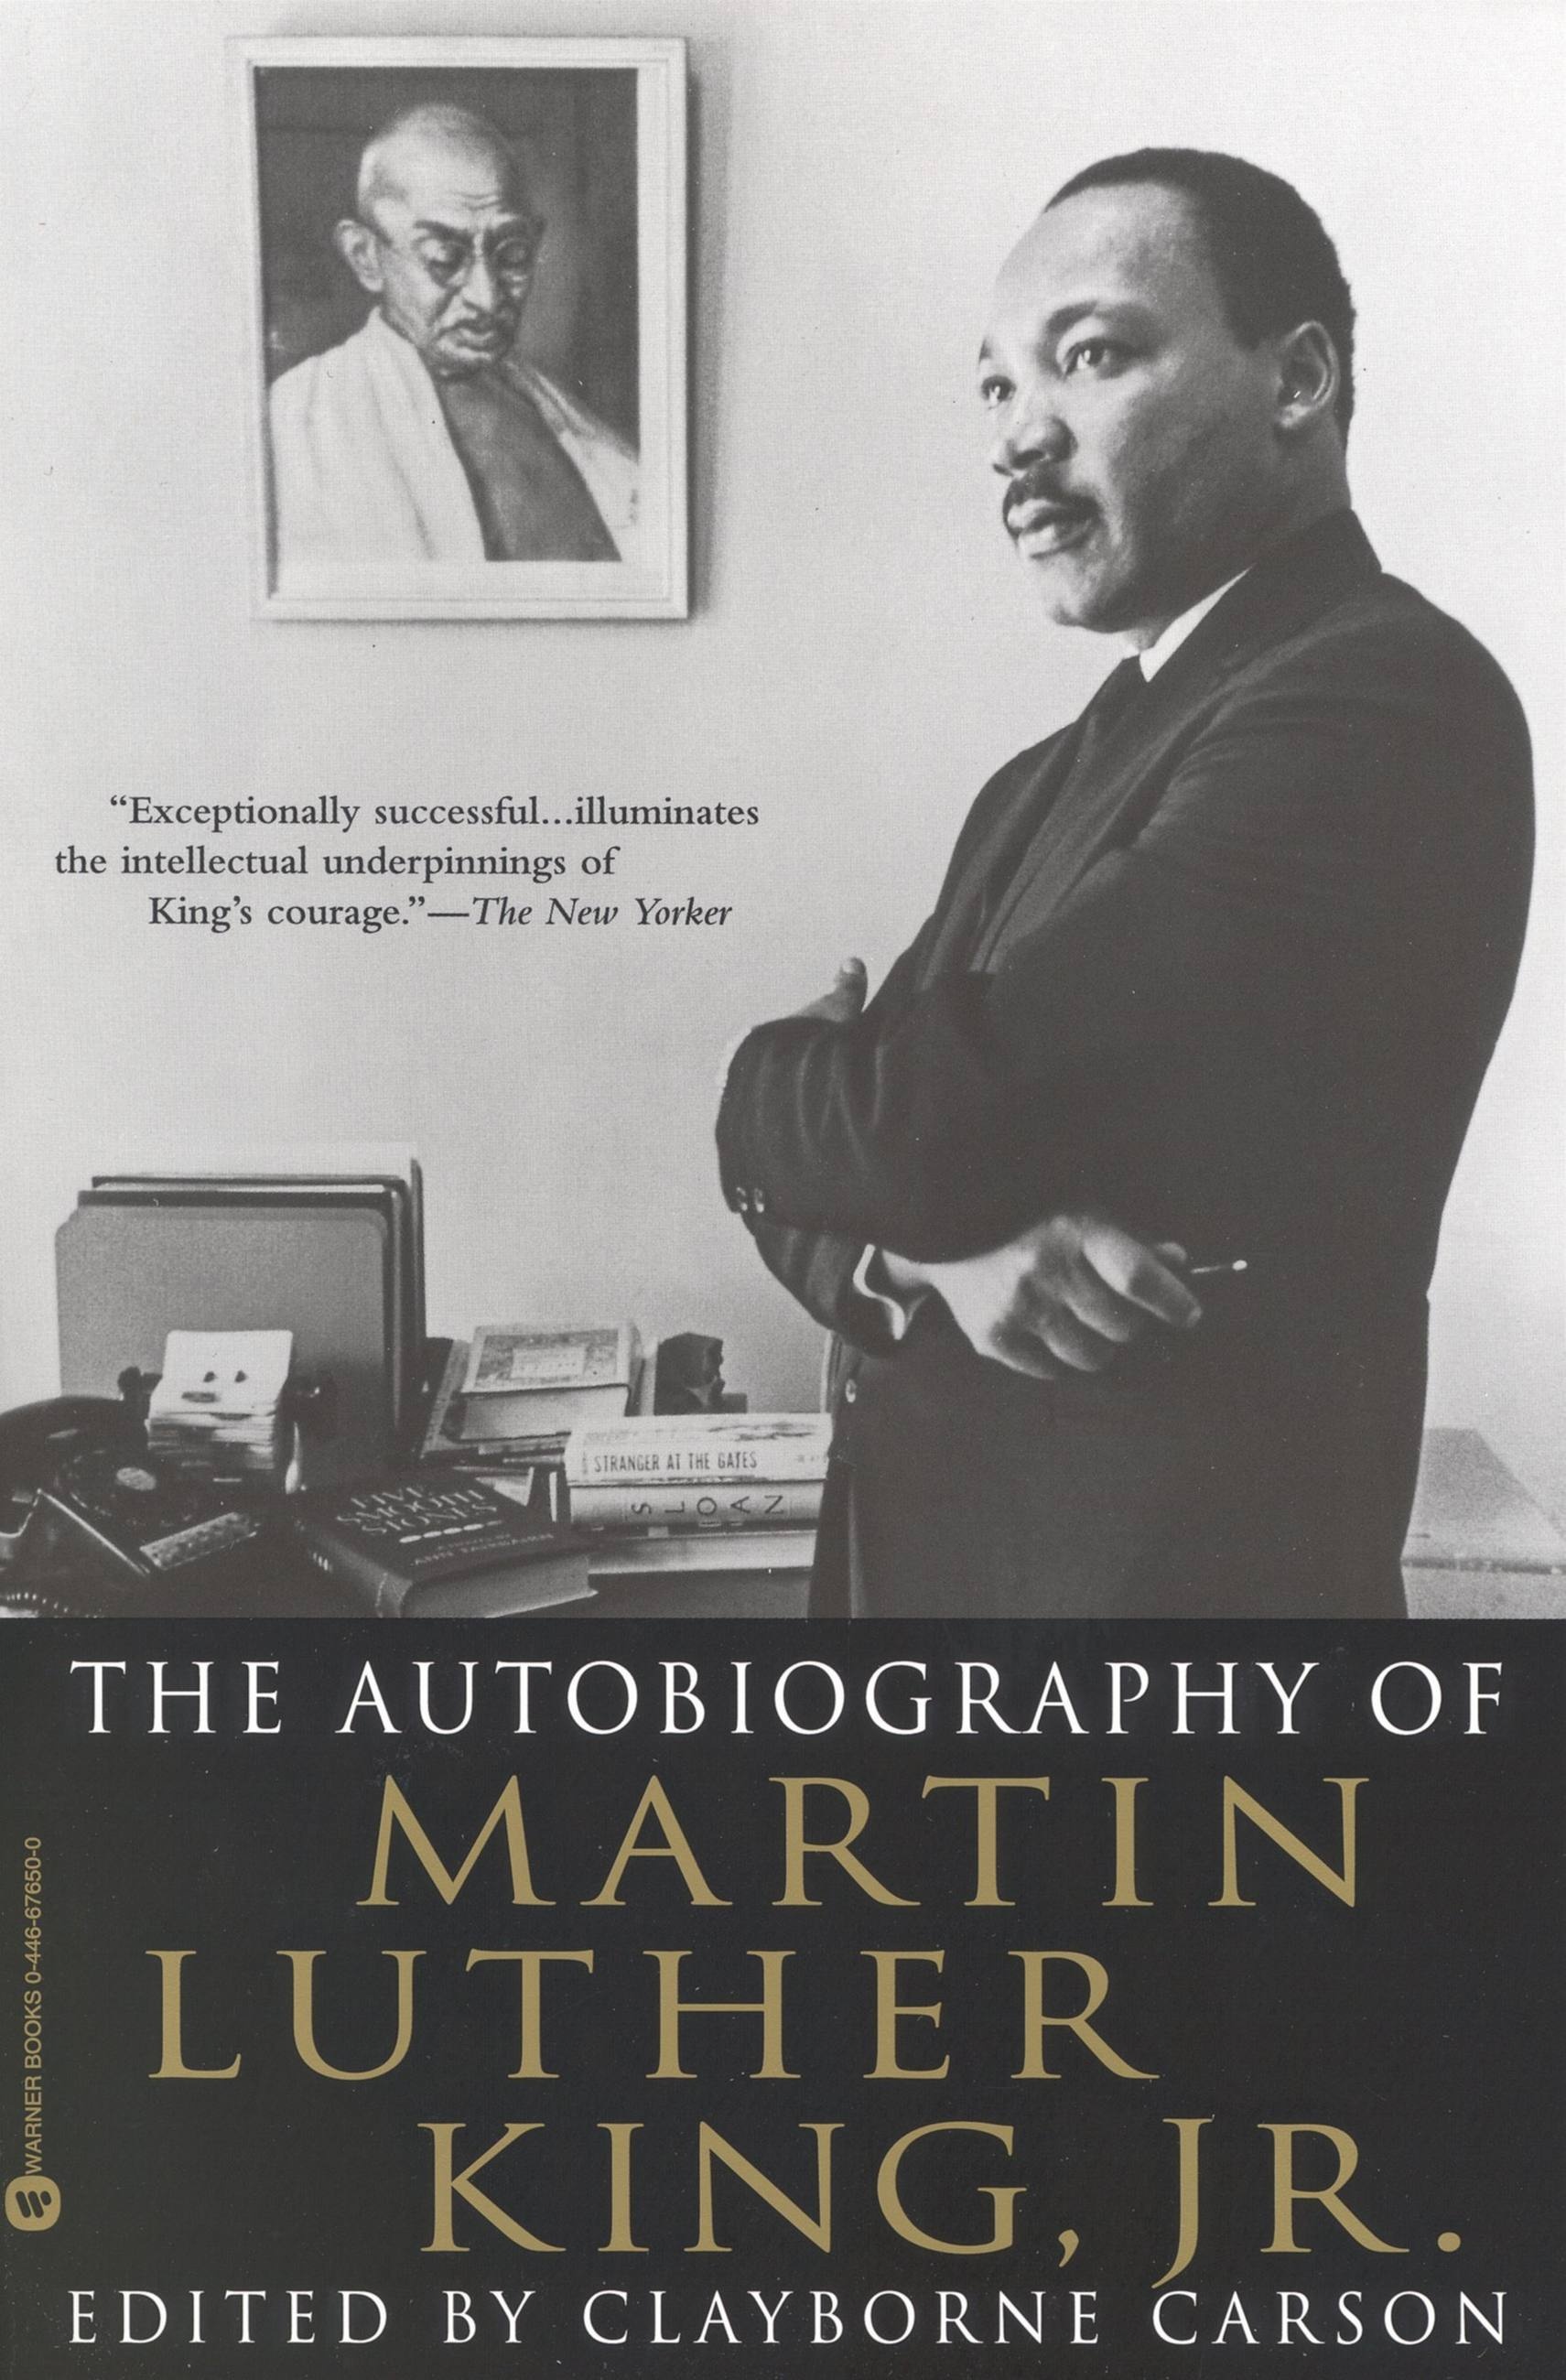 The　Carson　Book　Martin　Luther　Autobiography　Group　Jr.　by　of　Hachette　King,　Clayborne